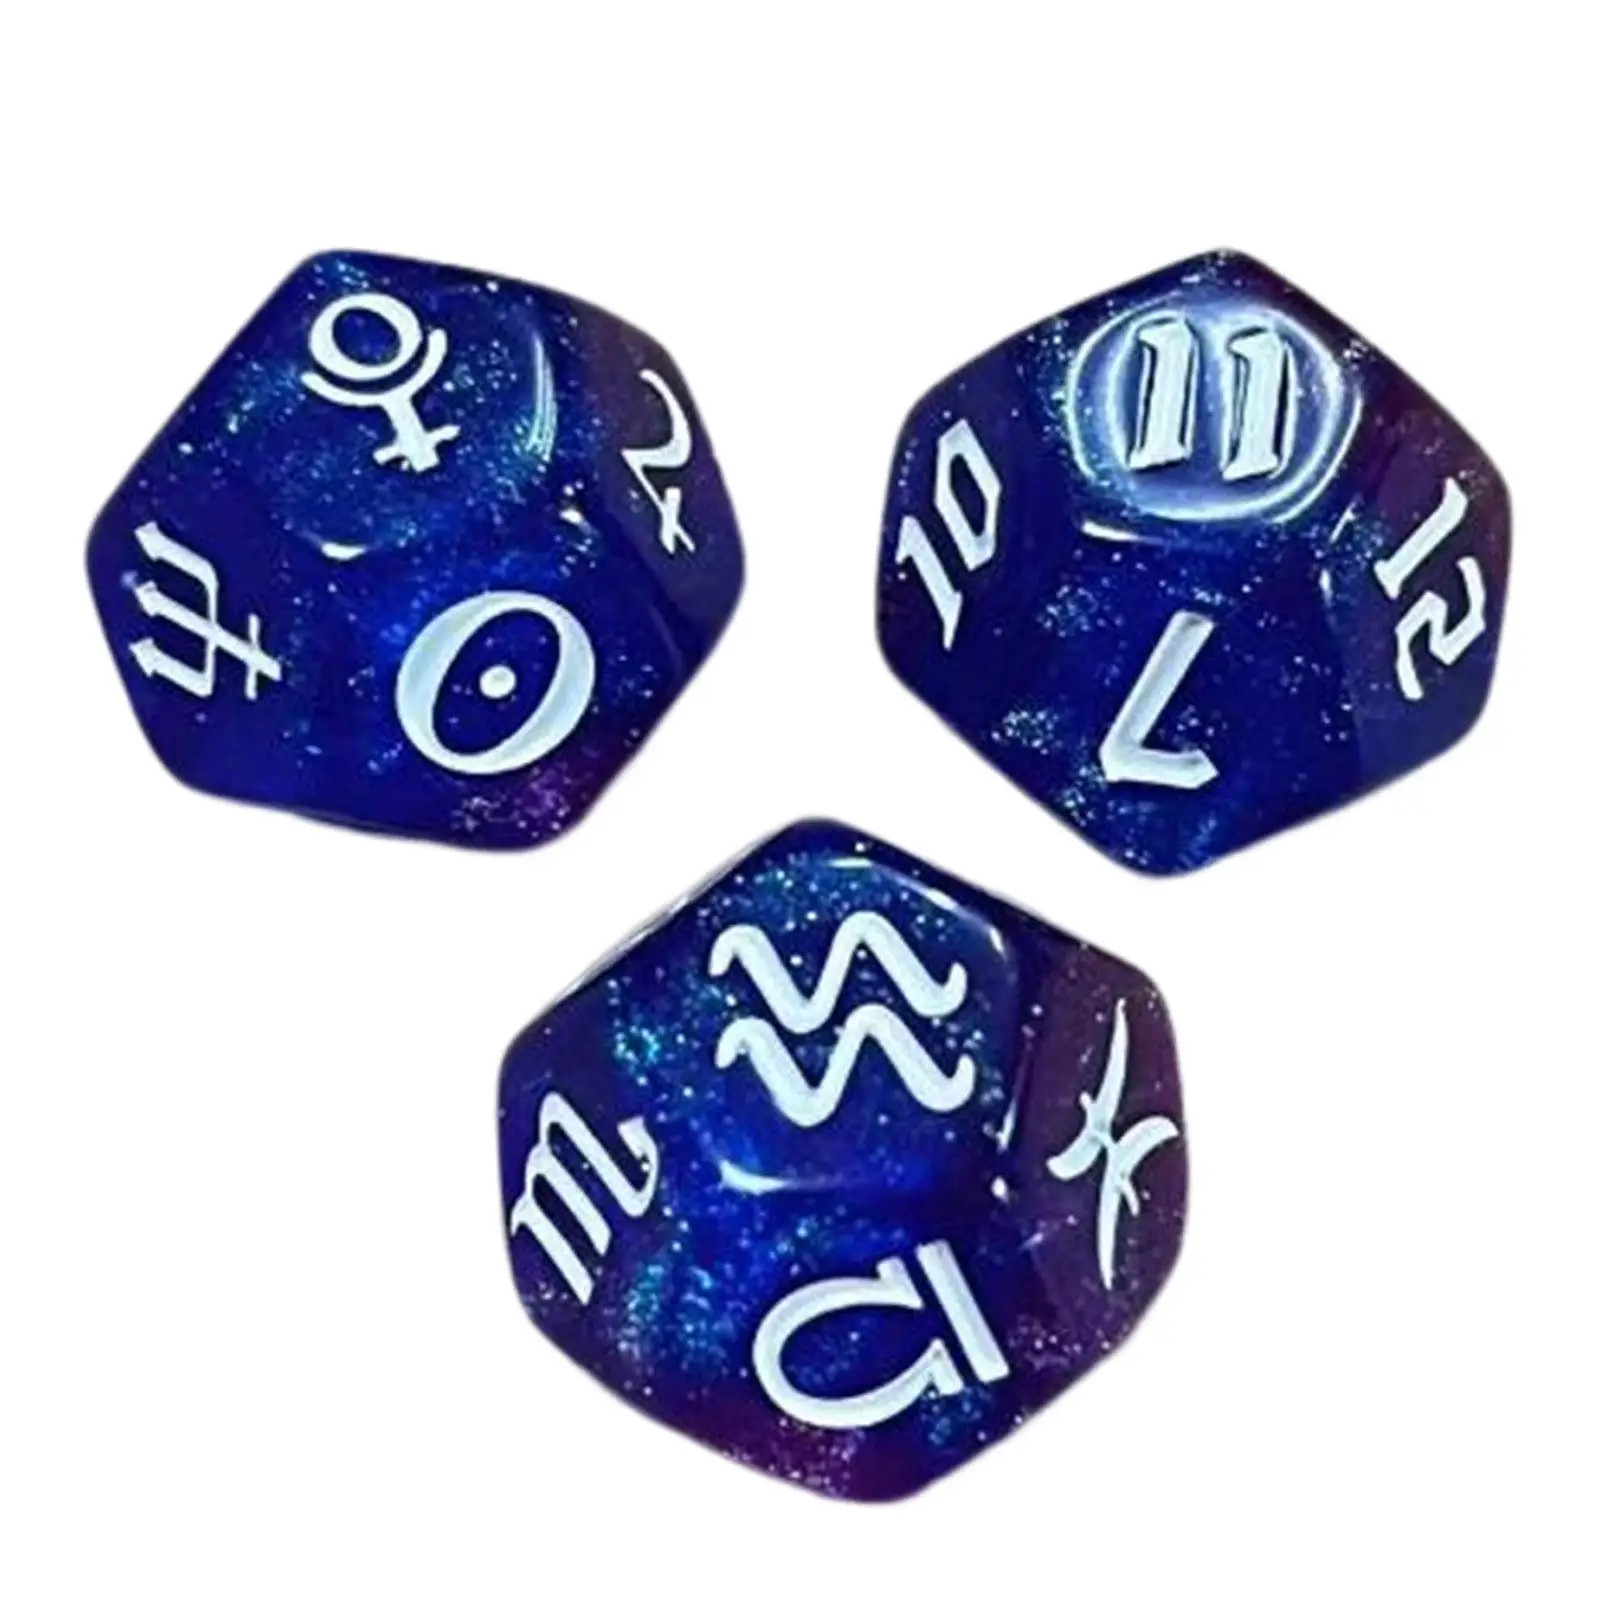 3 Pieces Polyhedral Dice Set Collection Acrylic Constellation Sign Dice for Family Gathering Gaming Accessory